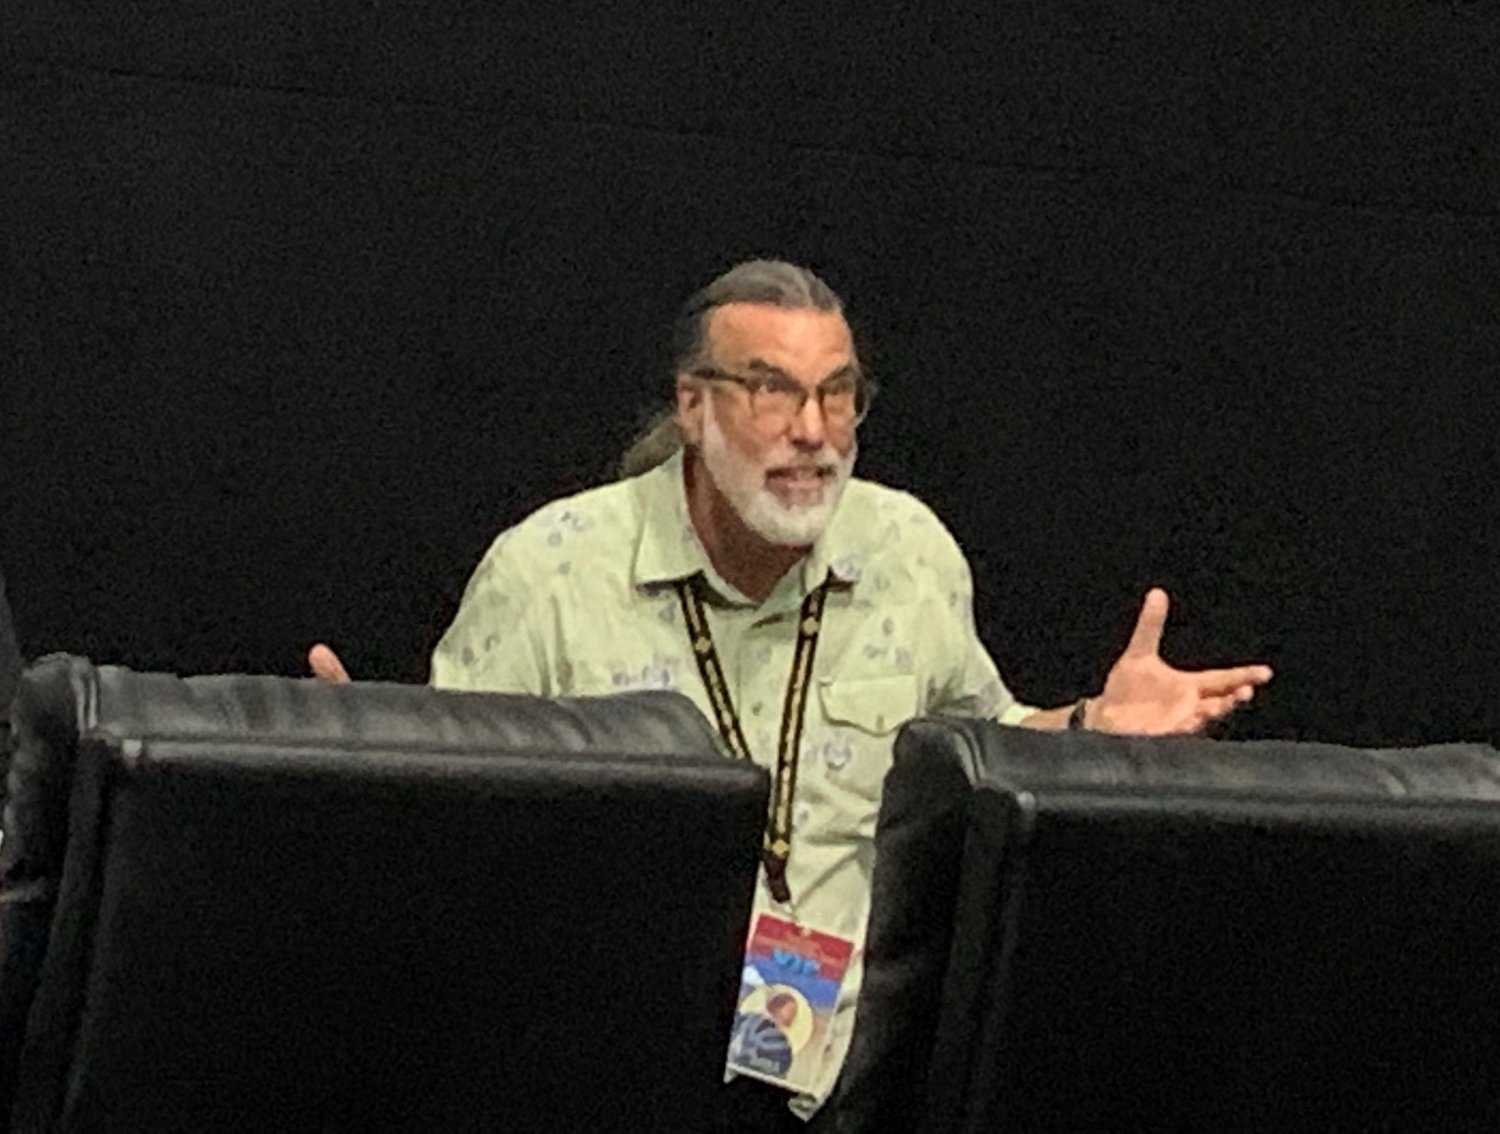 Don Foster, longtime Hollywood executive producer from “Rosanne” to “Two and a Half Men” and “Big Bang Theory,” took part in Friday’s screenwriting panel for the film festival.